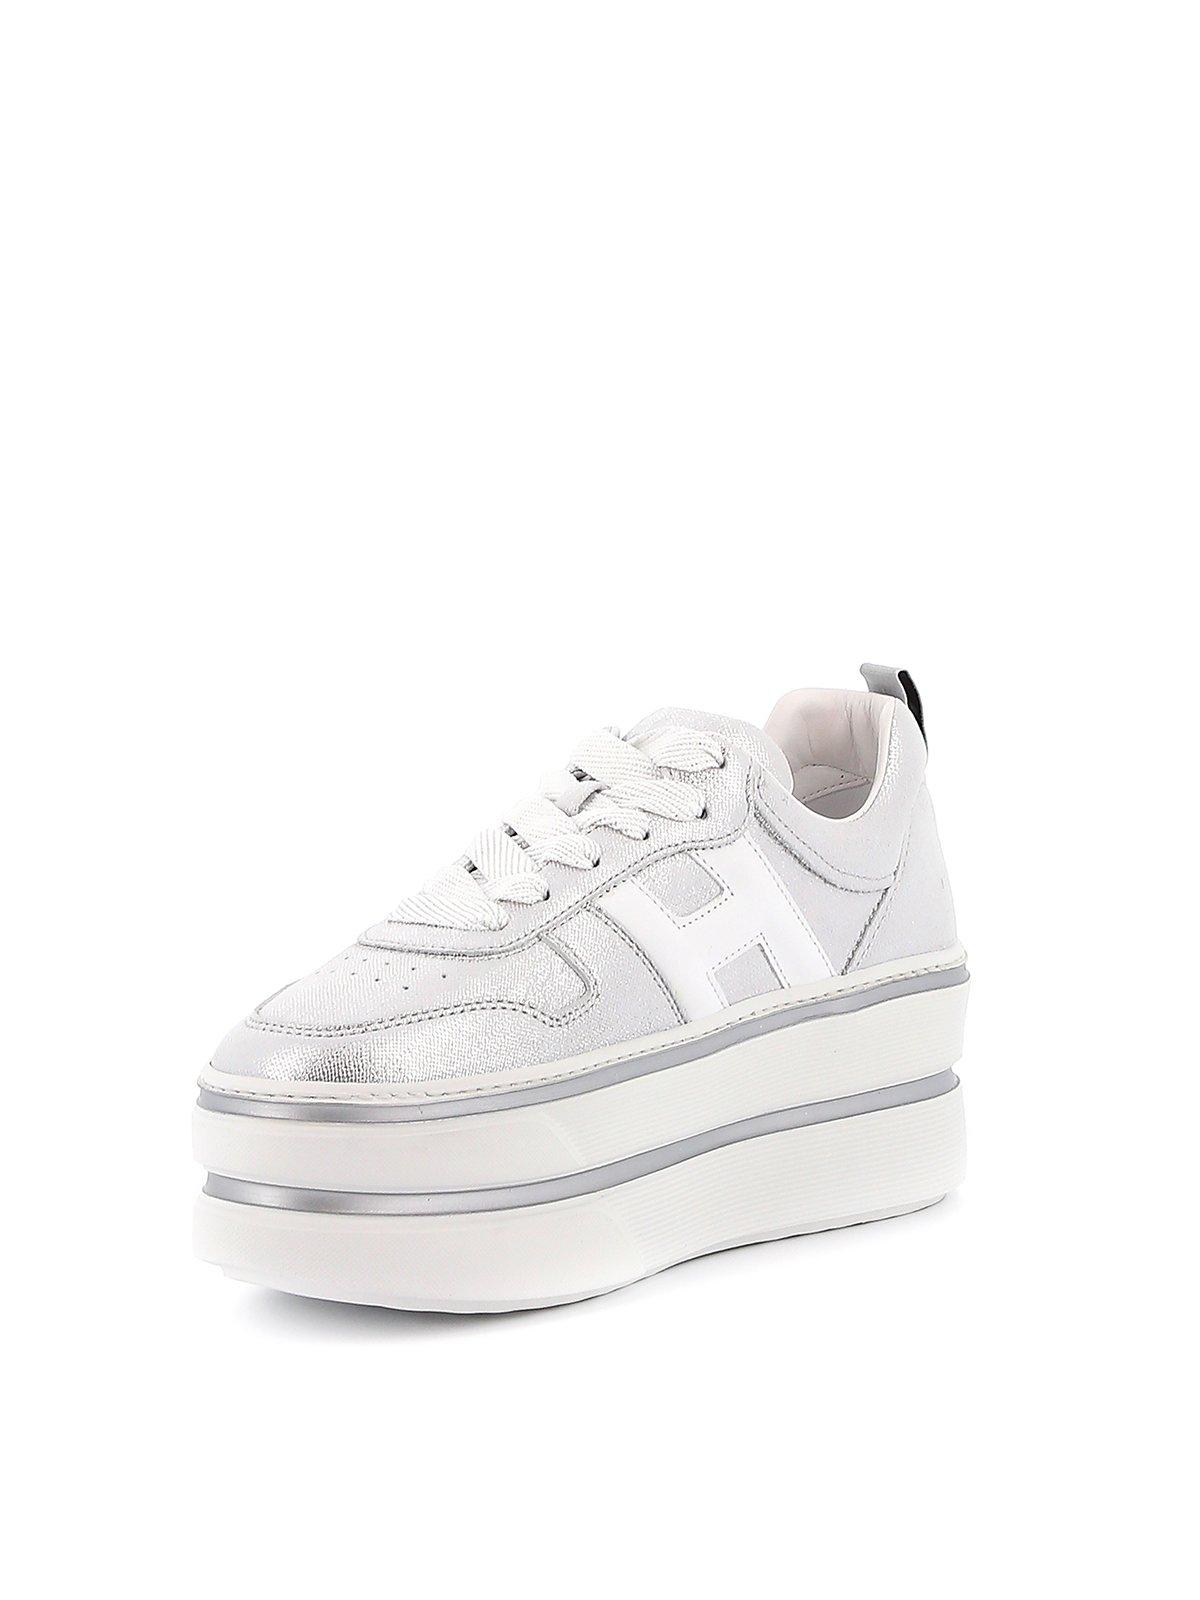 Hogan Sneakers H449 Silver And White in Metallic | Lyst